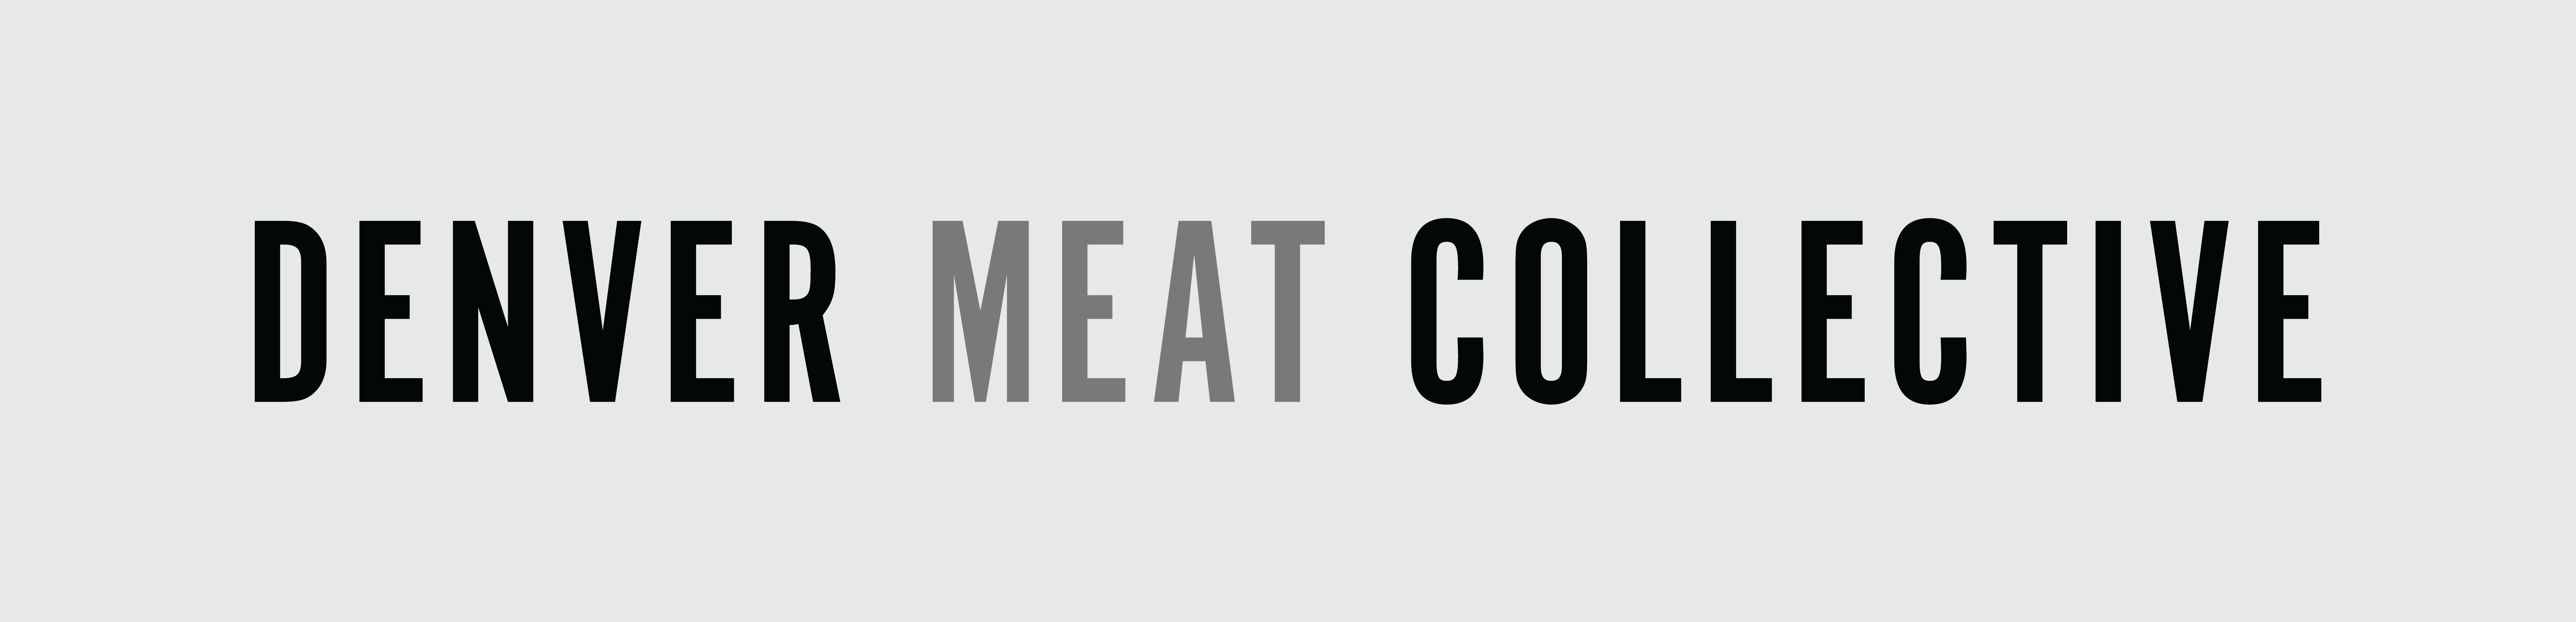 denver meat collective logo by courtney hilow